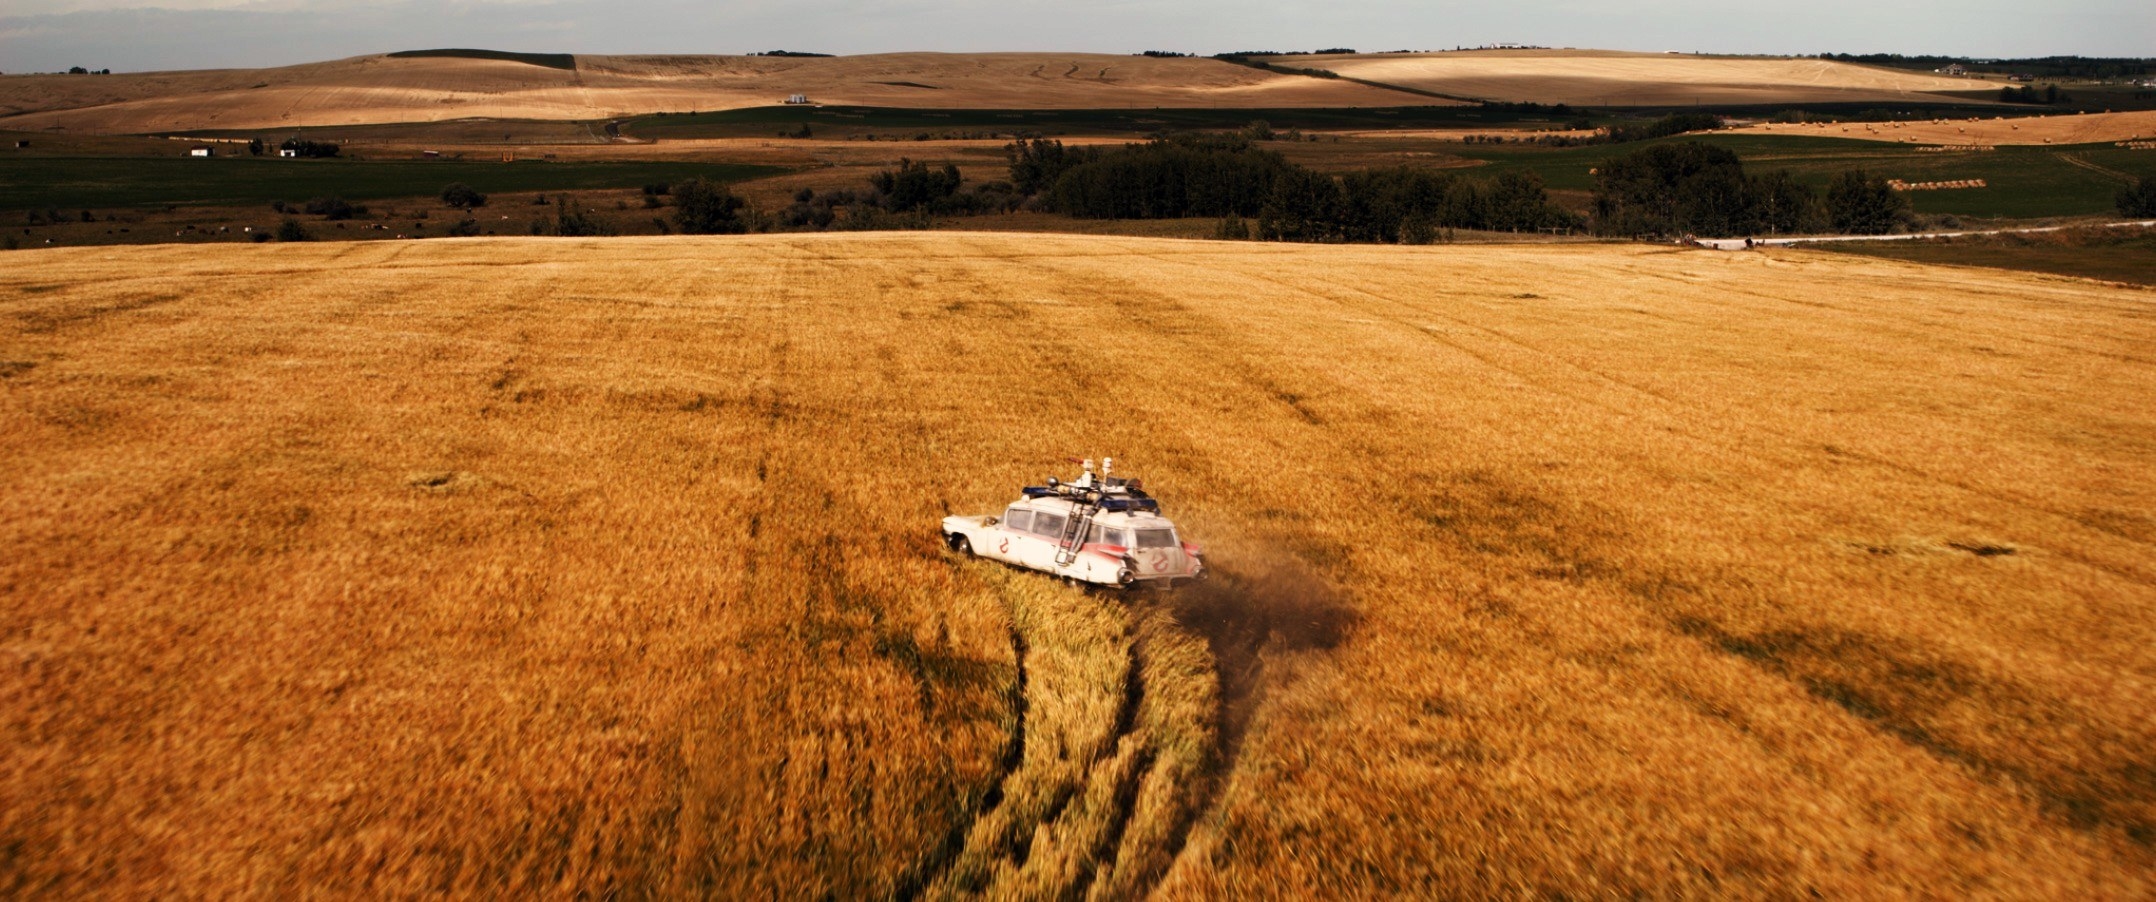 Ecto-1 driving through a field of grass in the middle of nowhere